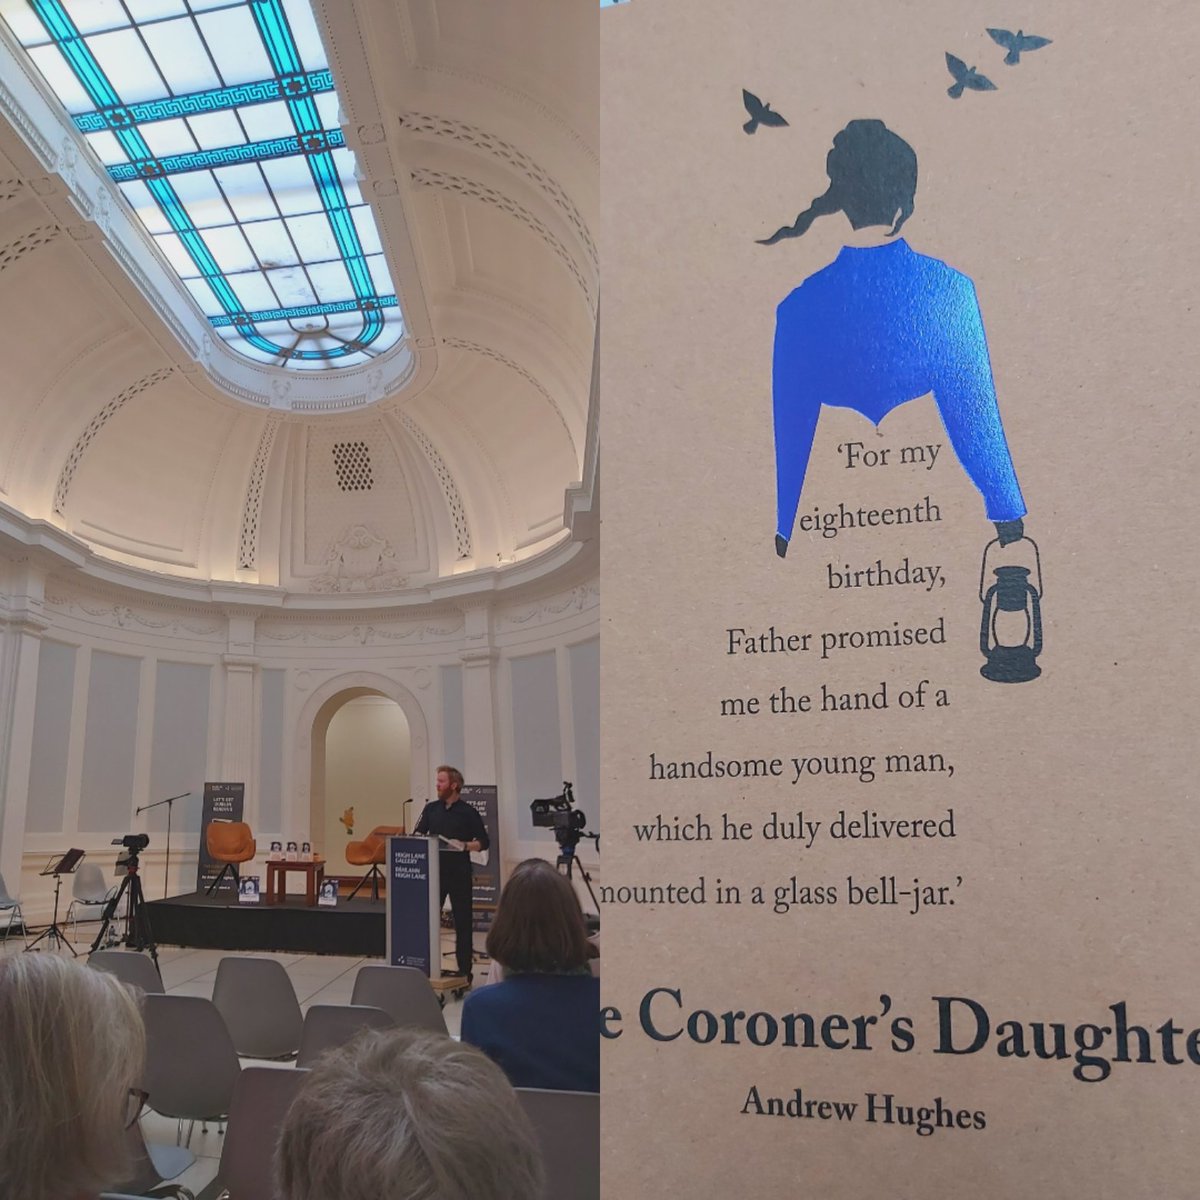 Here at the beautiful @TheHughLane for @1dublin1book @DublinCityofLit @DubCityCouncil sold out  event in celebration of The Coroner's Daughter by @And_Hughes looking forward for it to kick off